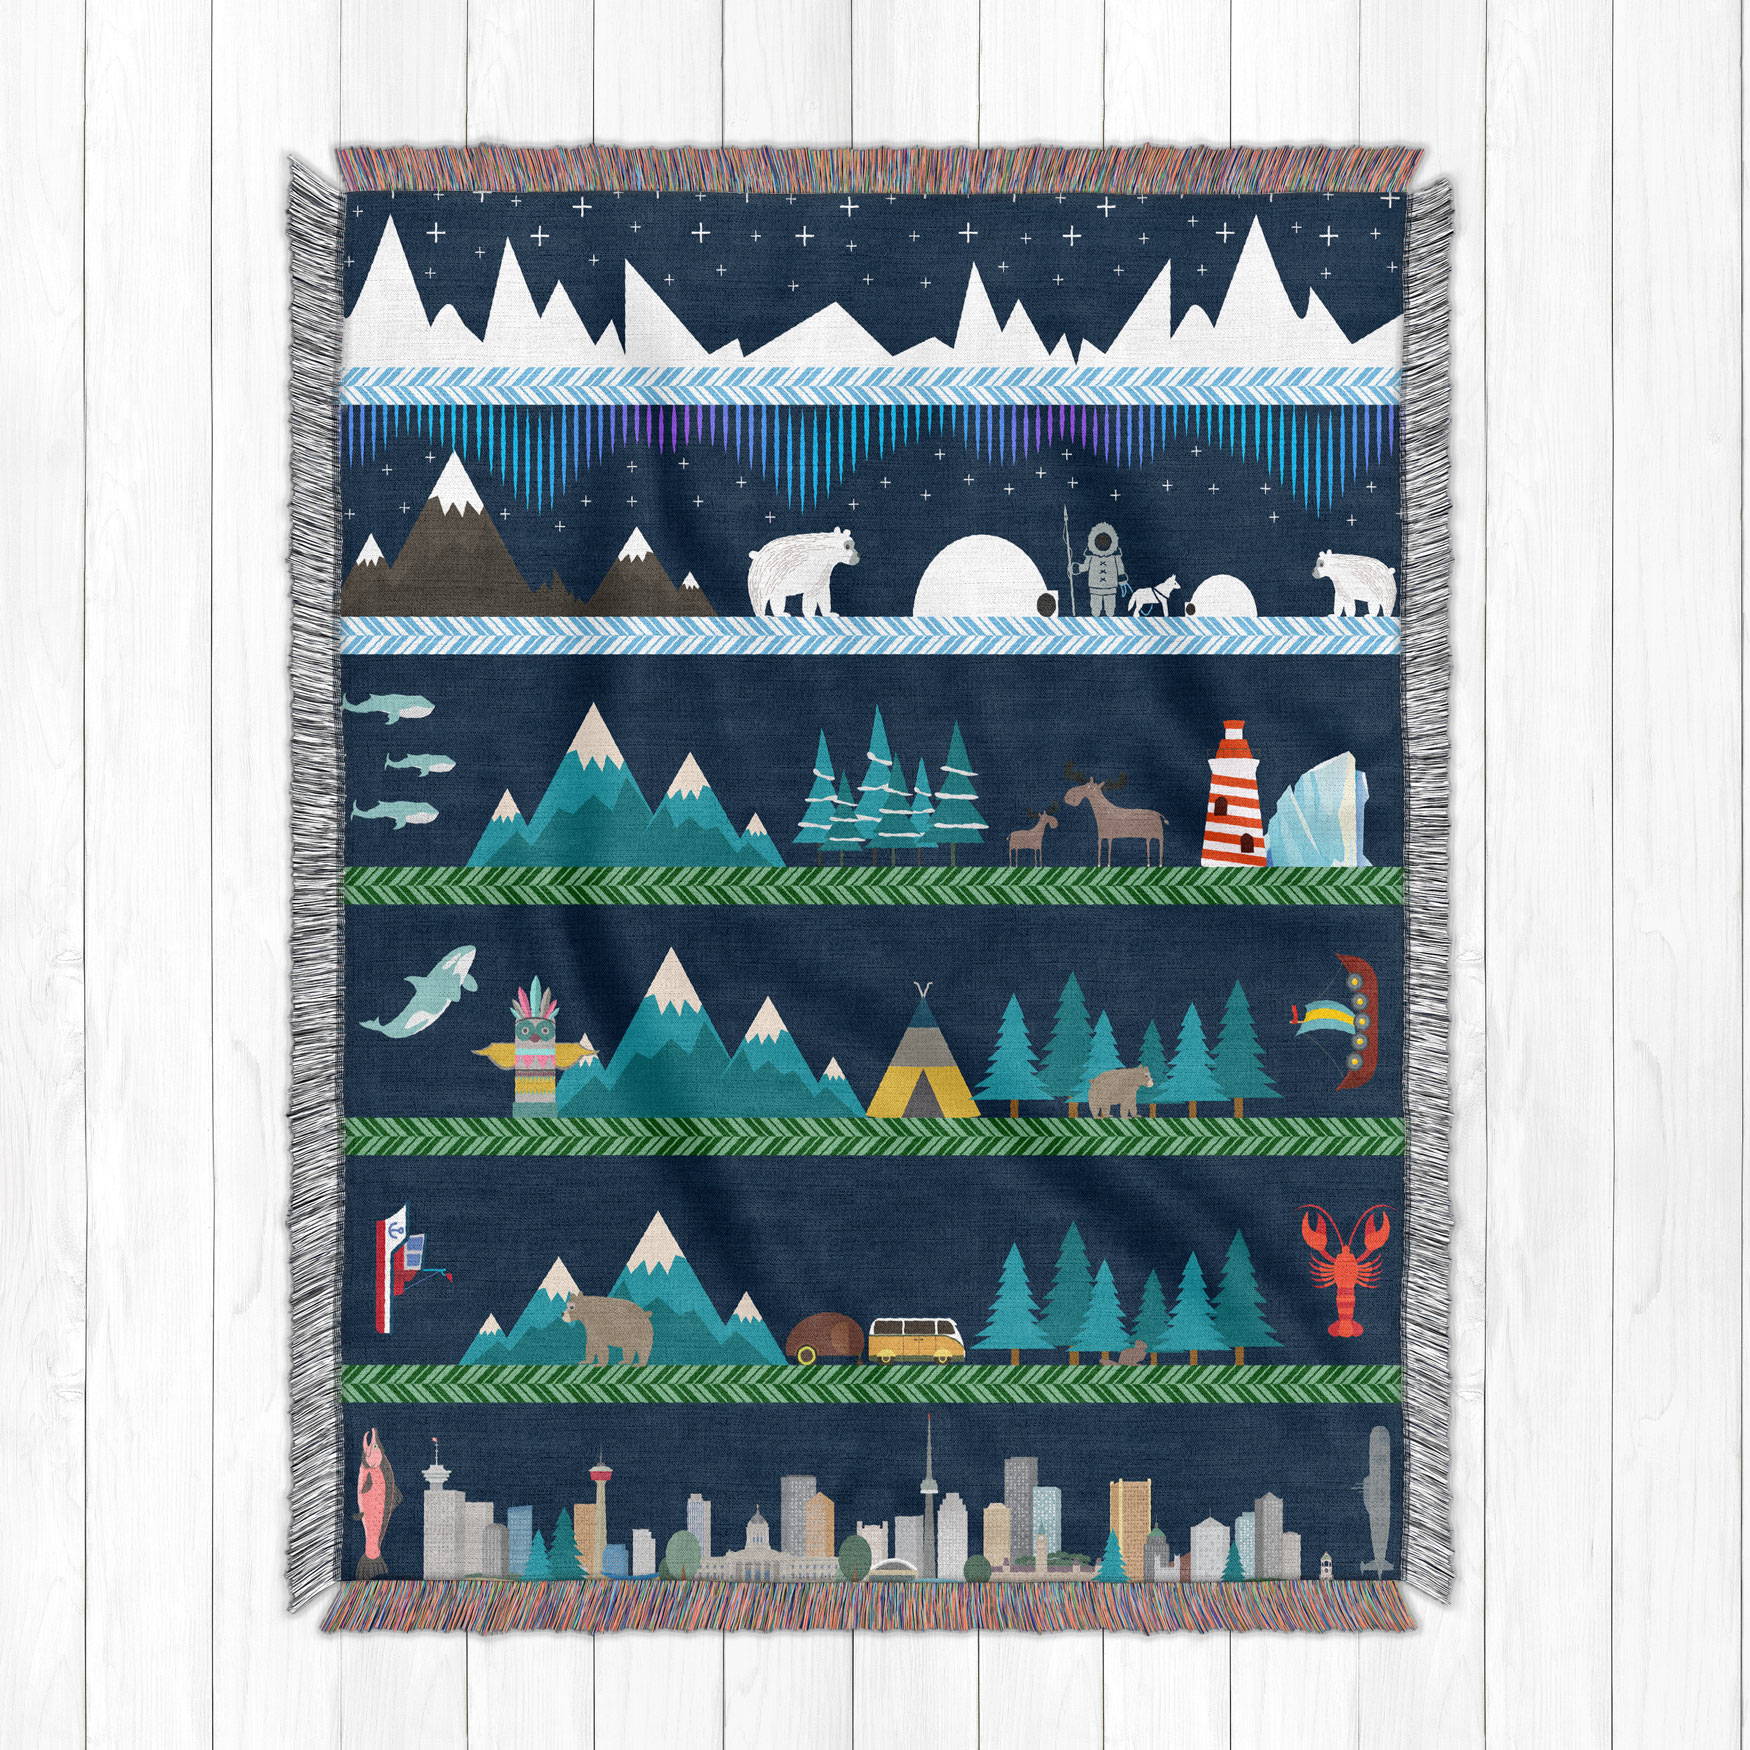 illustrated artwork of Canada from north to south as a cotton woven blanket